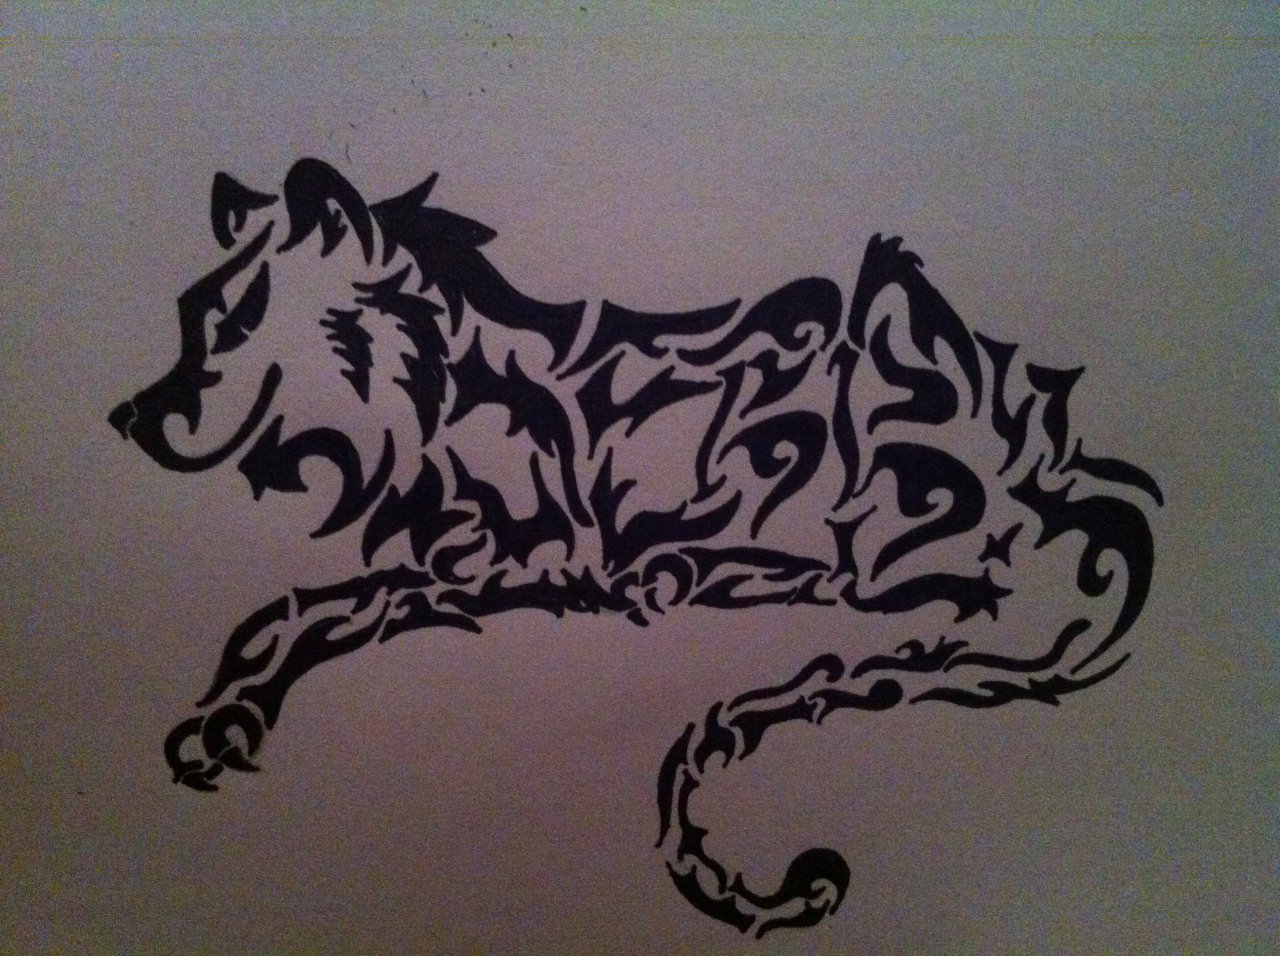 Tribal Panther -- Tattoo Design? by Jaydeness -- Fur Affinity [dot] net